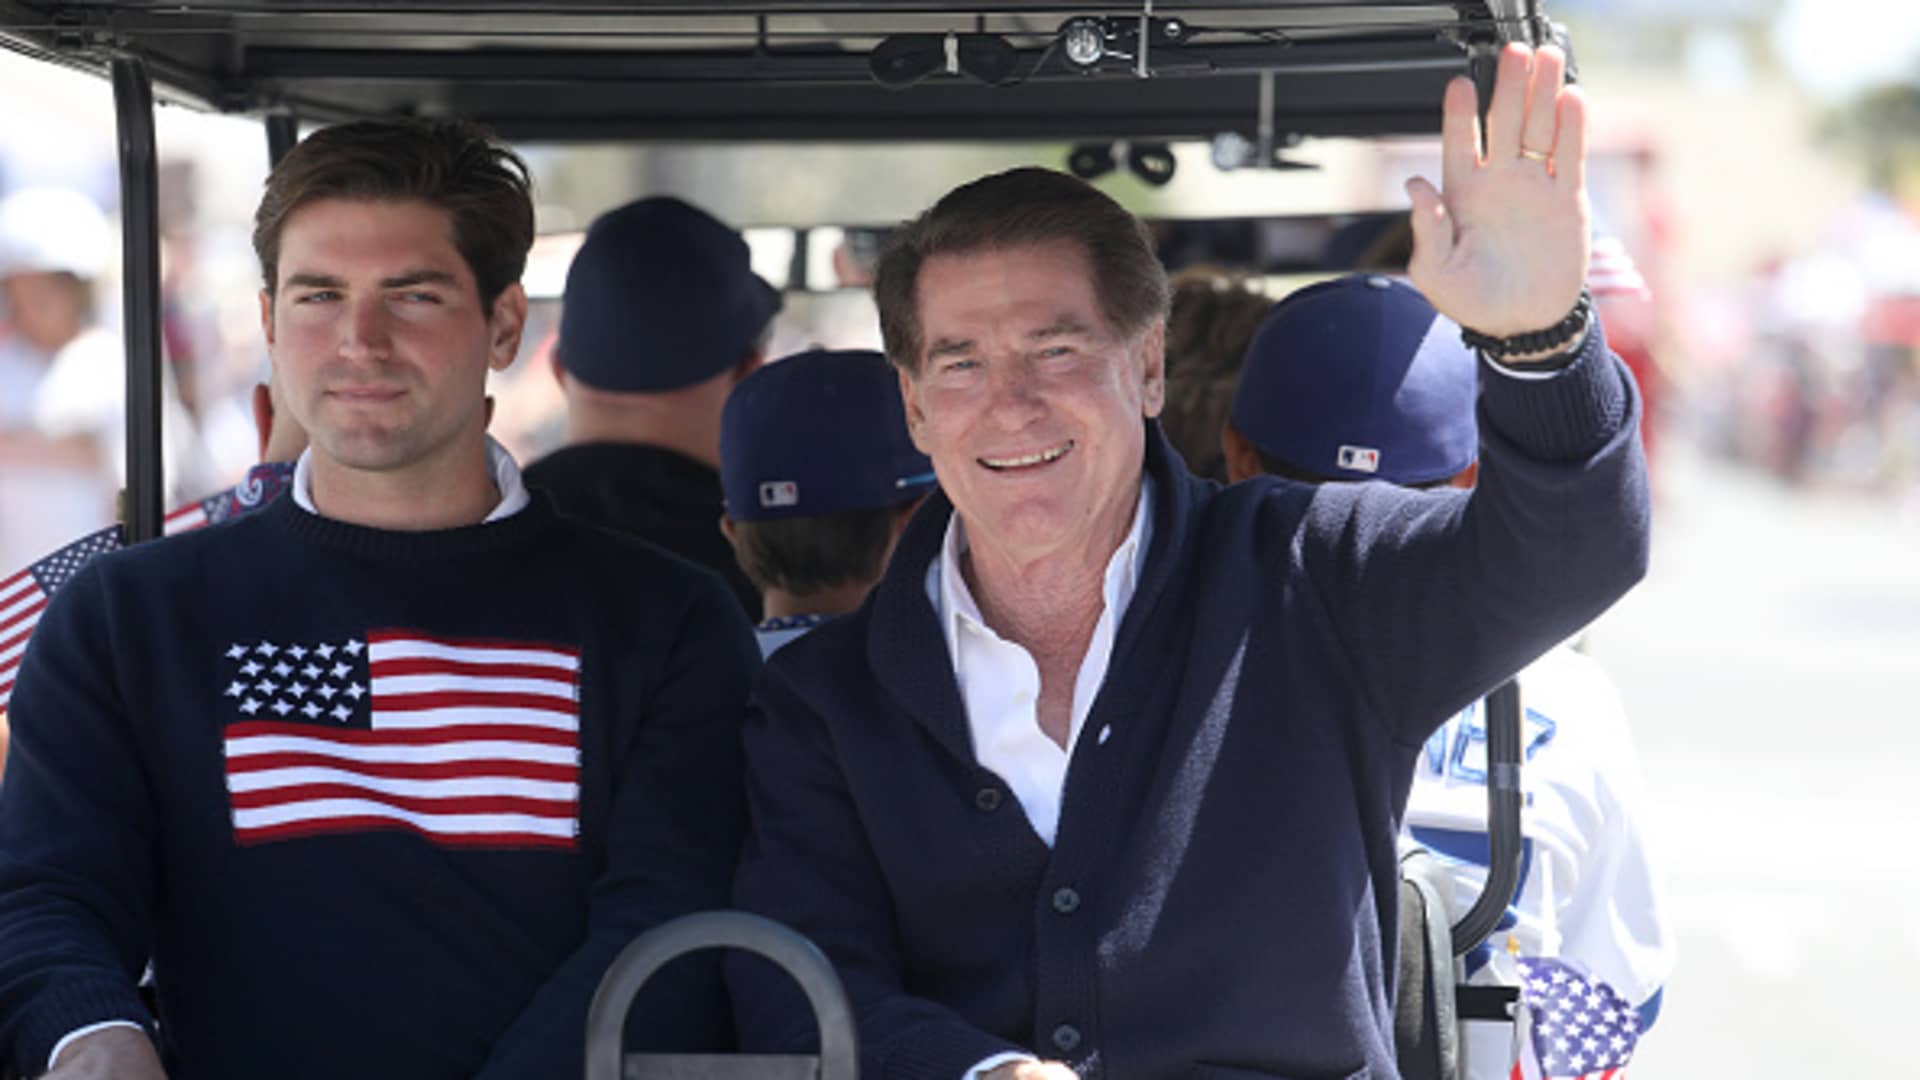 Steve Garvey, right, former first baseman with the Los Angeles Dodgers, with son Ryan Garvey, left, is a guest of honor at the Huntington Beach Fourth of July Parade along Main Street in downtown in Huntington Beach, California, on July 4, 2022.